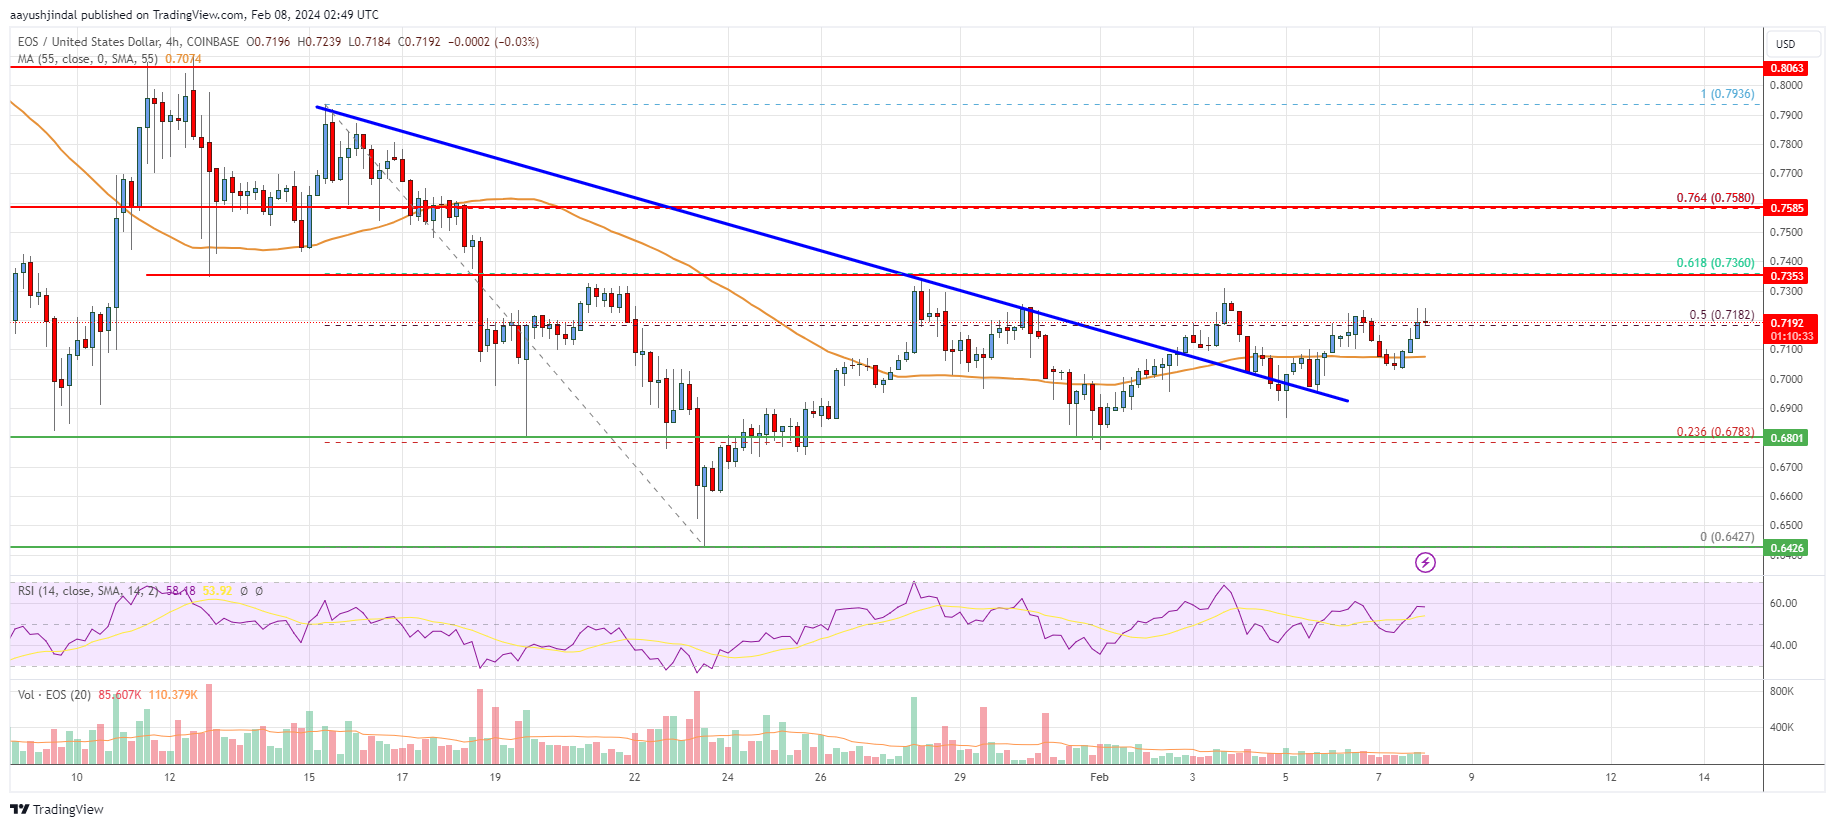 EOS Price Analysis: Why EOS Could Rally 10% To $0.80